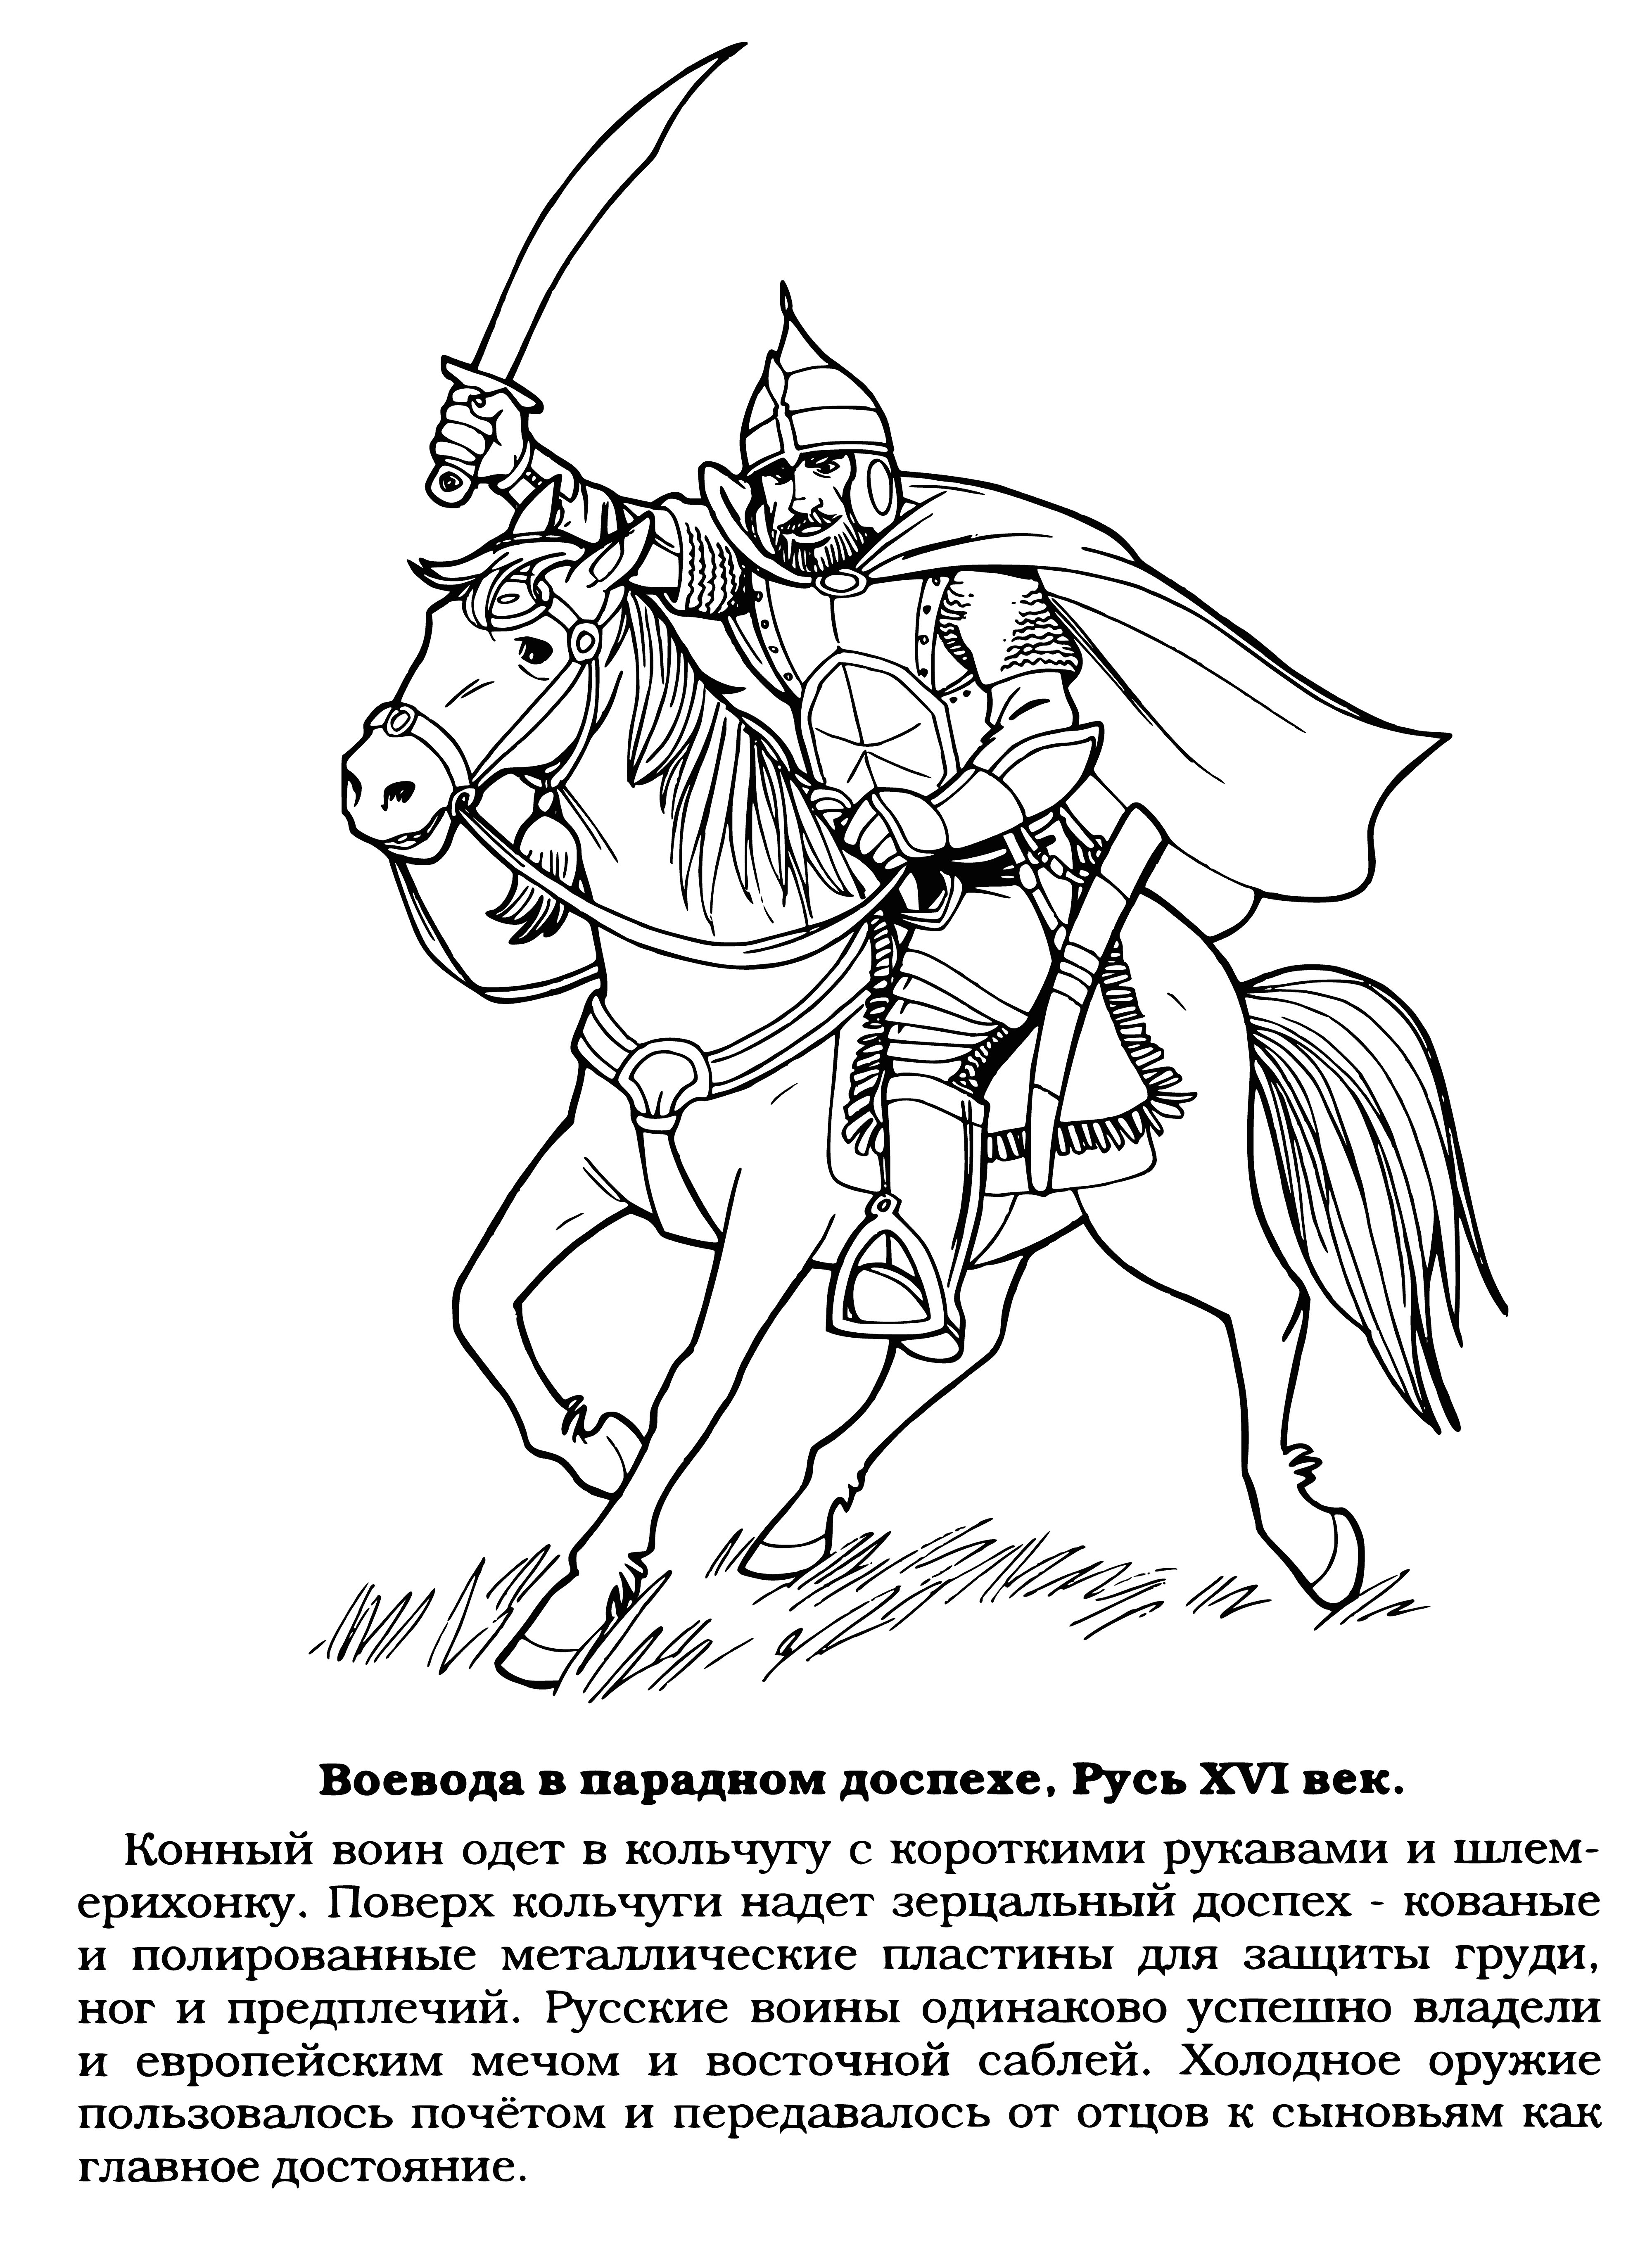 Voivode in ceremonial armor coloring page